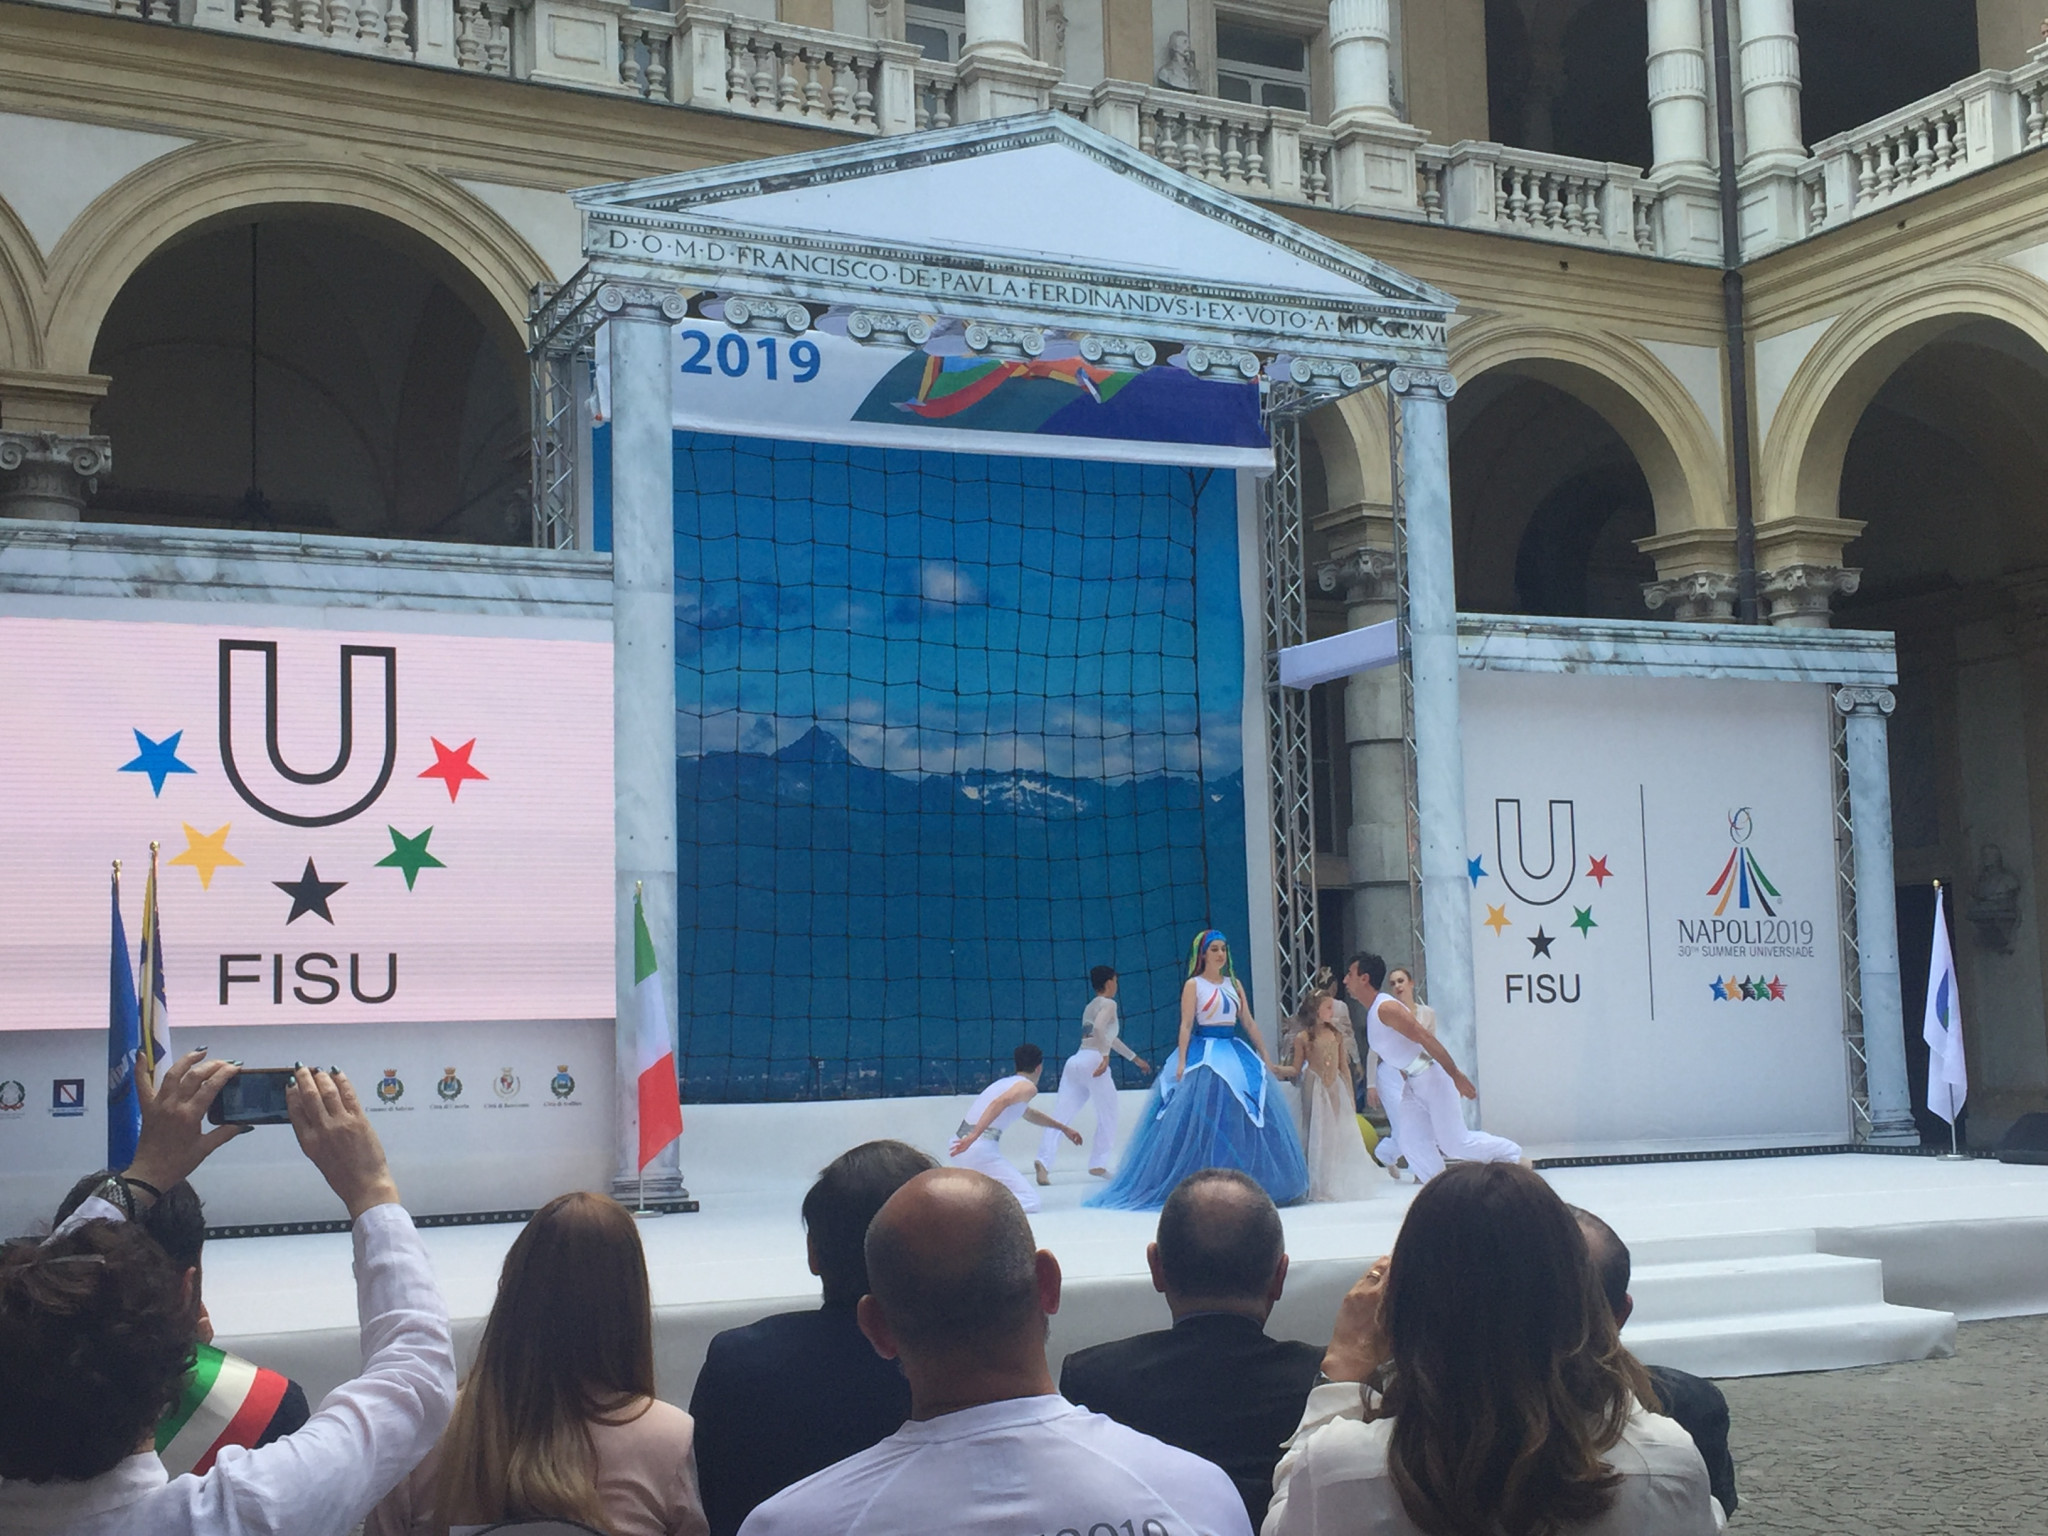 A life-size representation of the Naples 2019 Summer Universiade mascot, a mermaid called Partenope, was depicted during the Torch-lighting ceremony in Turin ©ITG